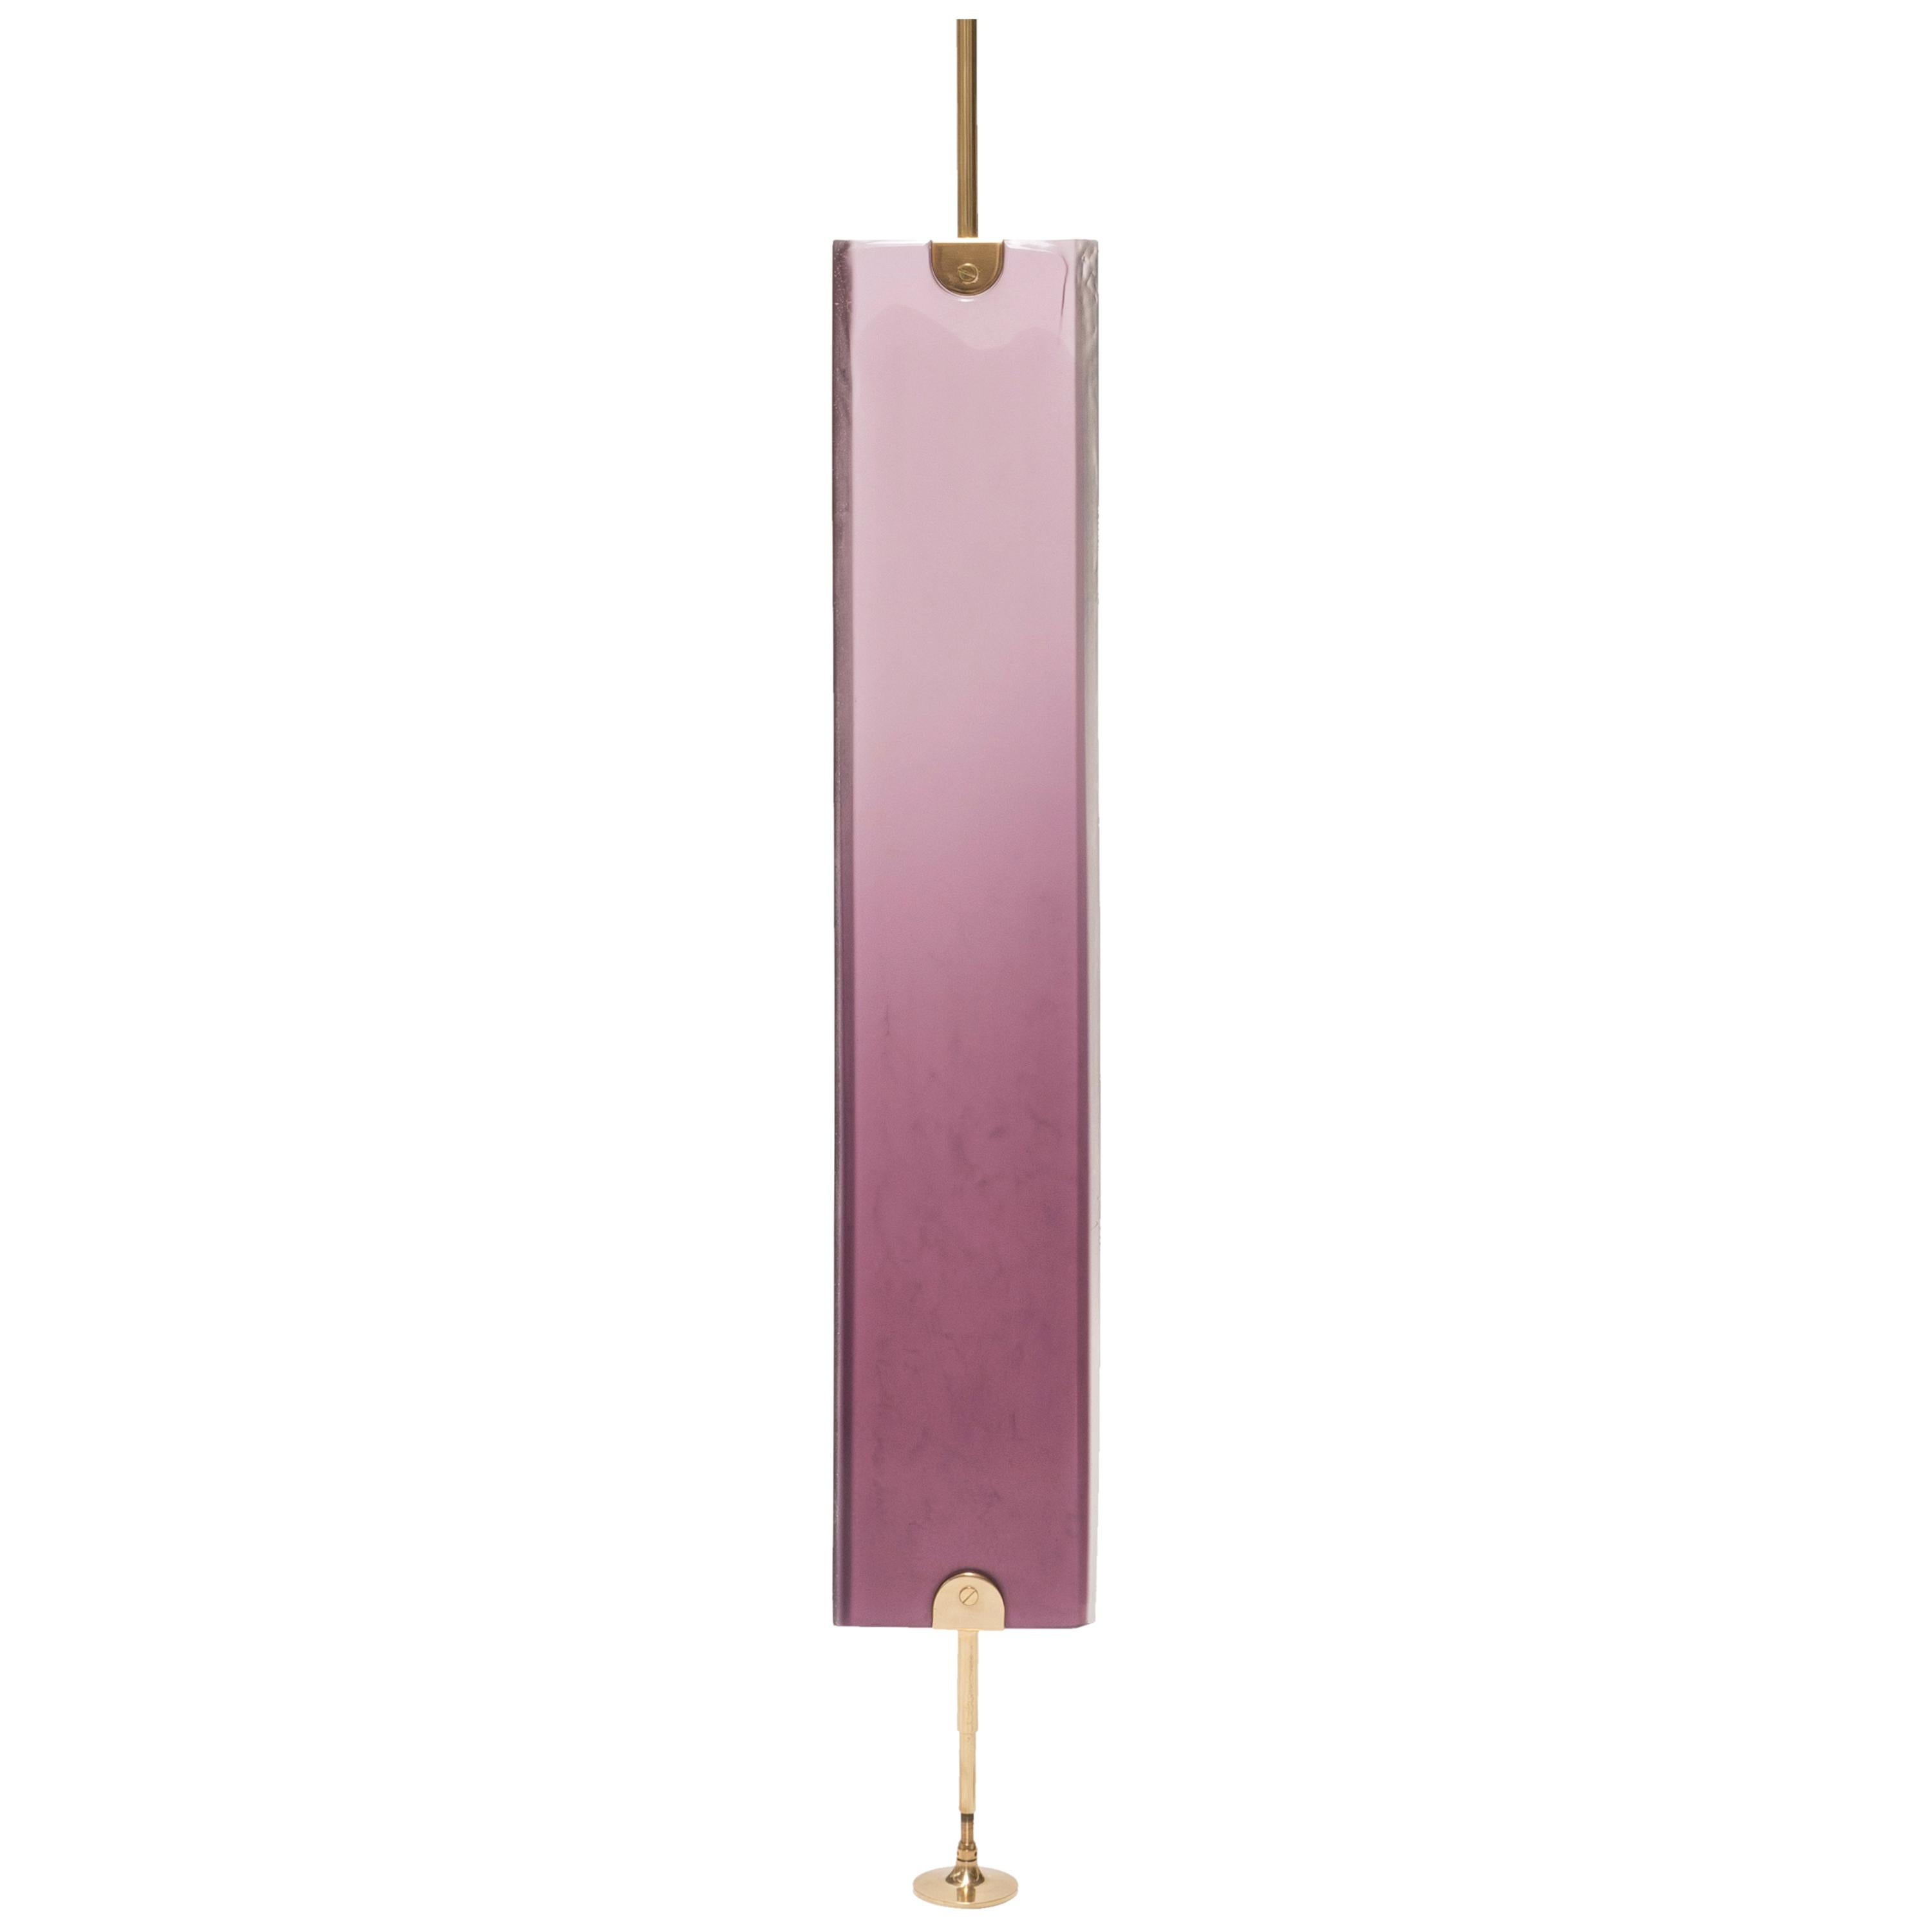 Reverso Separè REd Violet by Draga&Aurel Resin and Brass, 21st Century